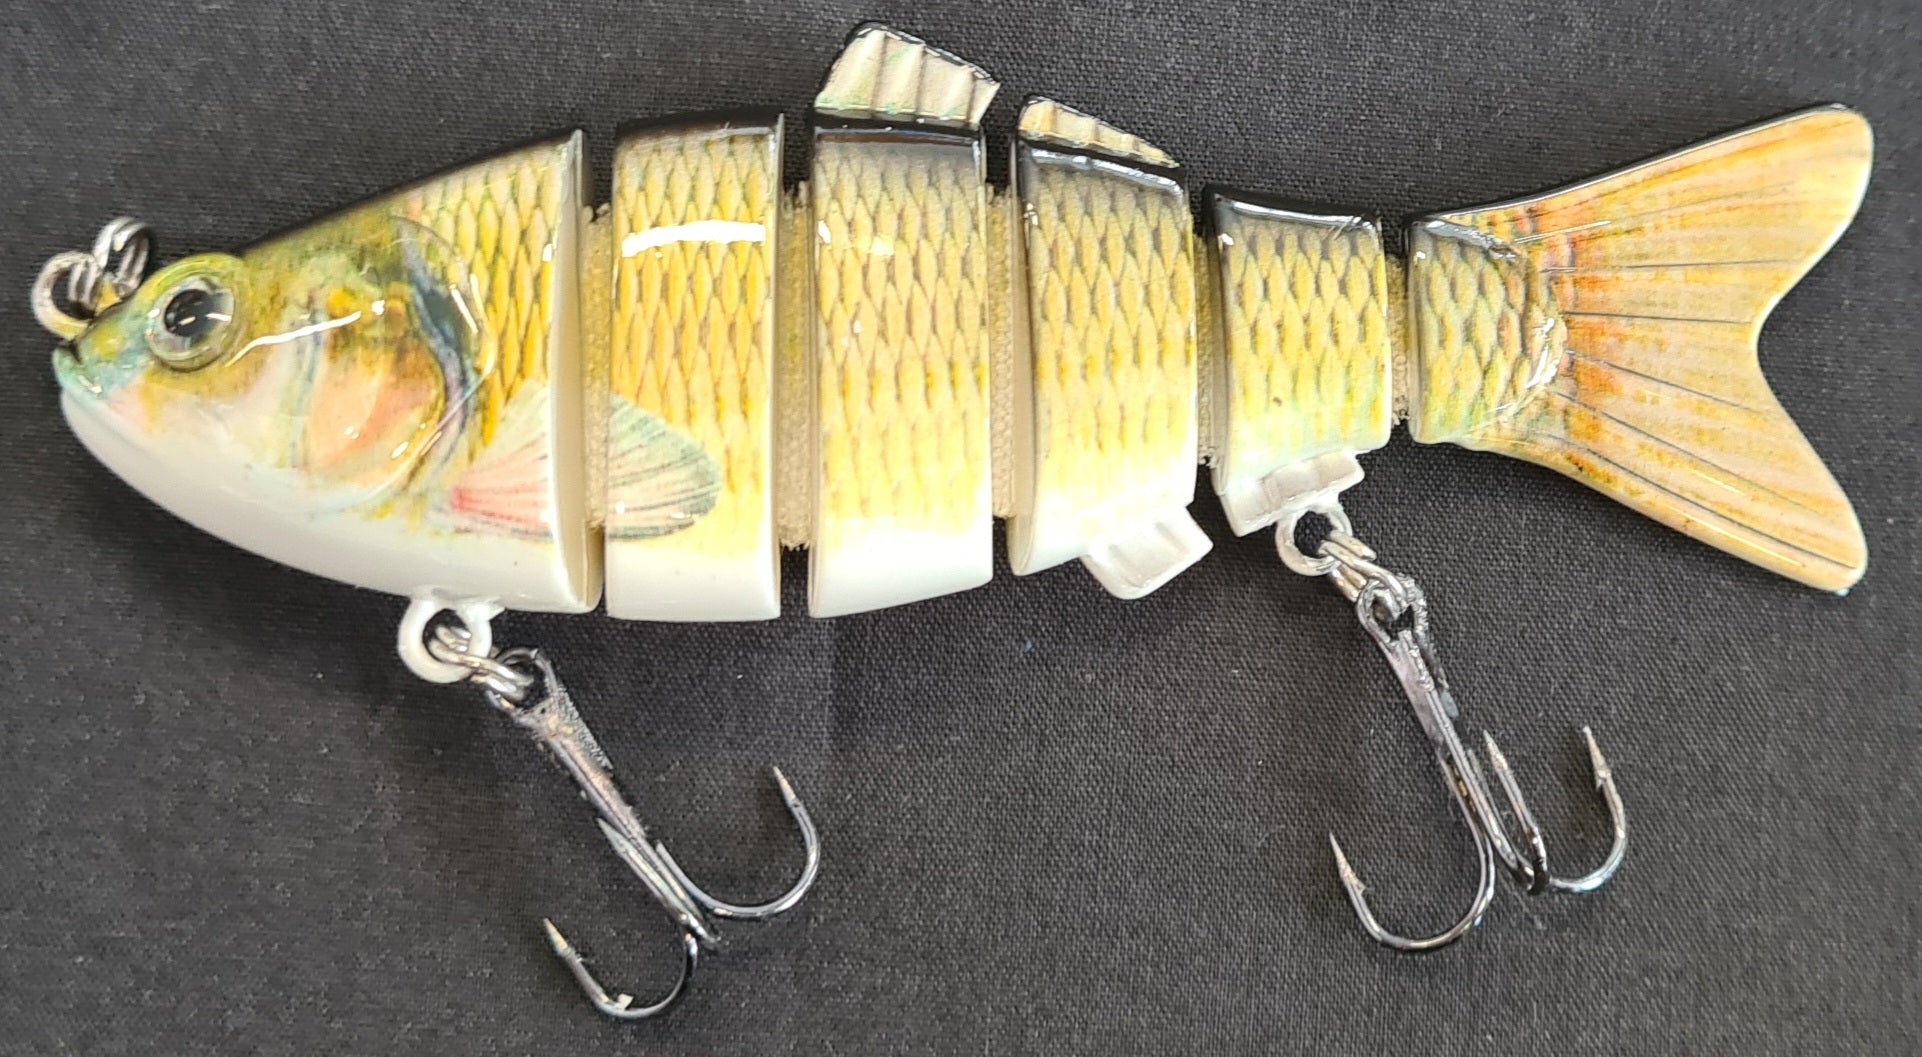 JOINTED SWIMBAIT LURES - REEL 'N' DEAL TACKLE